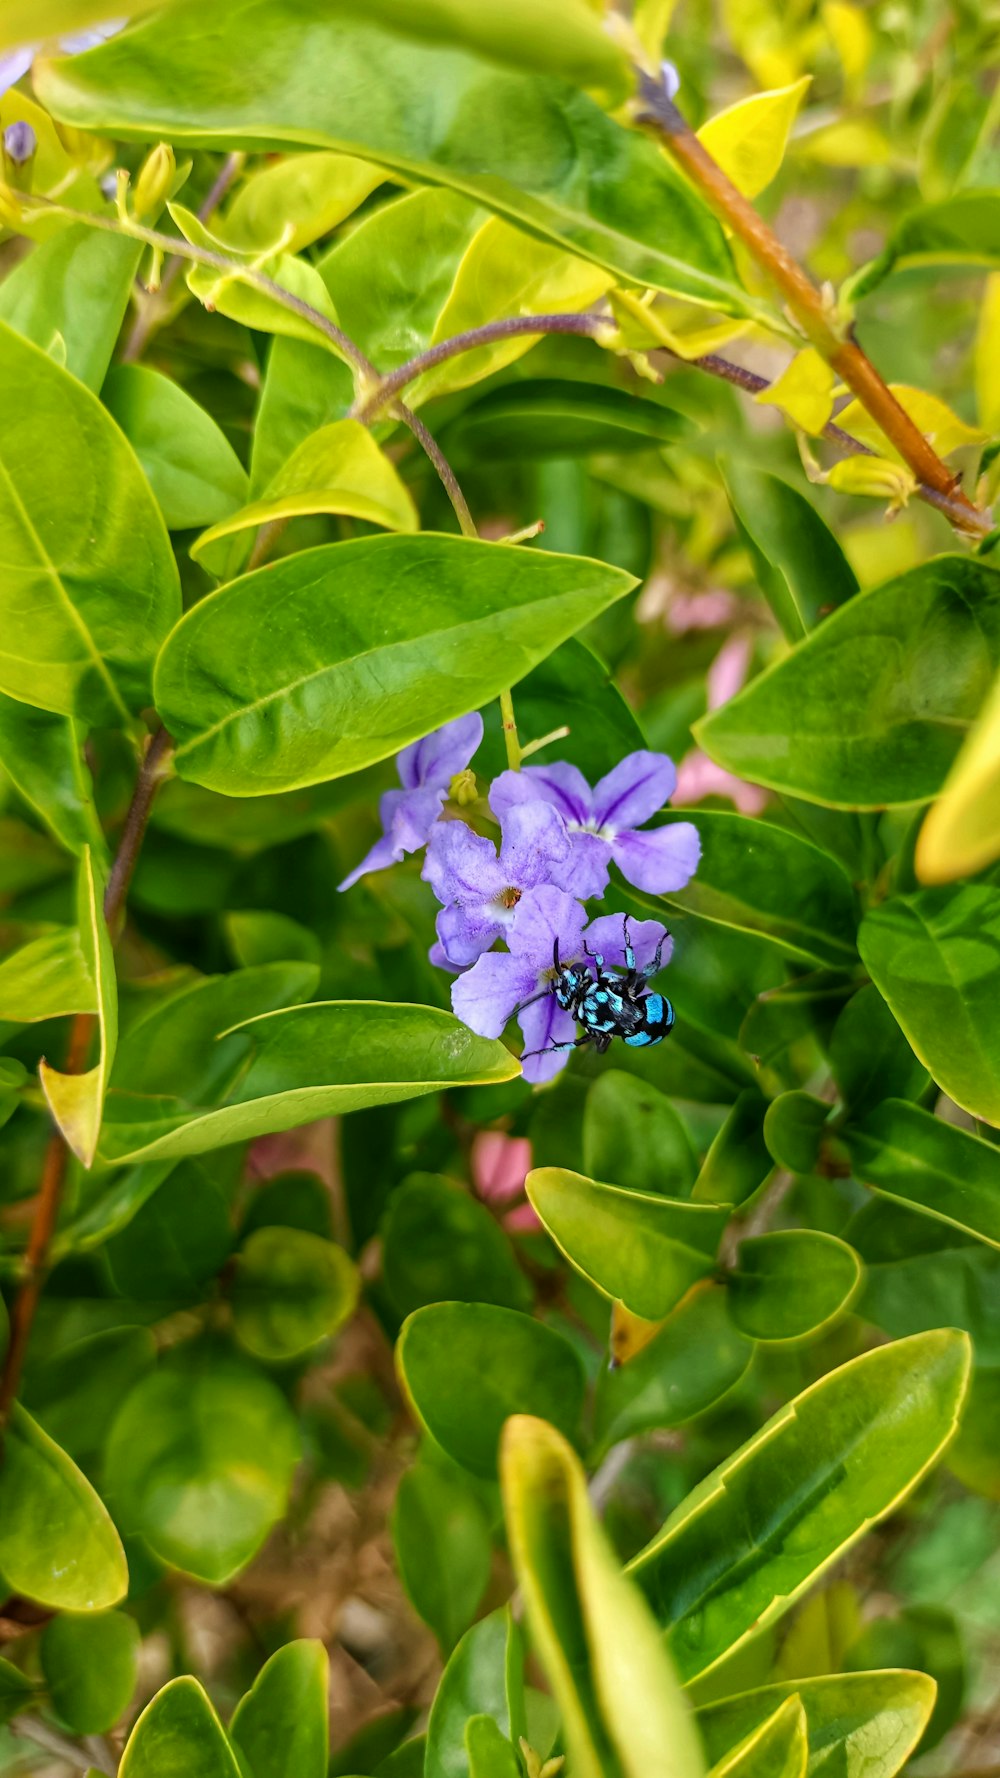 a purple flower with a blue center surrounded by green leaves